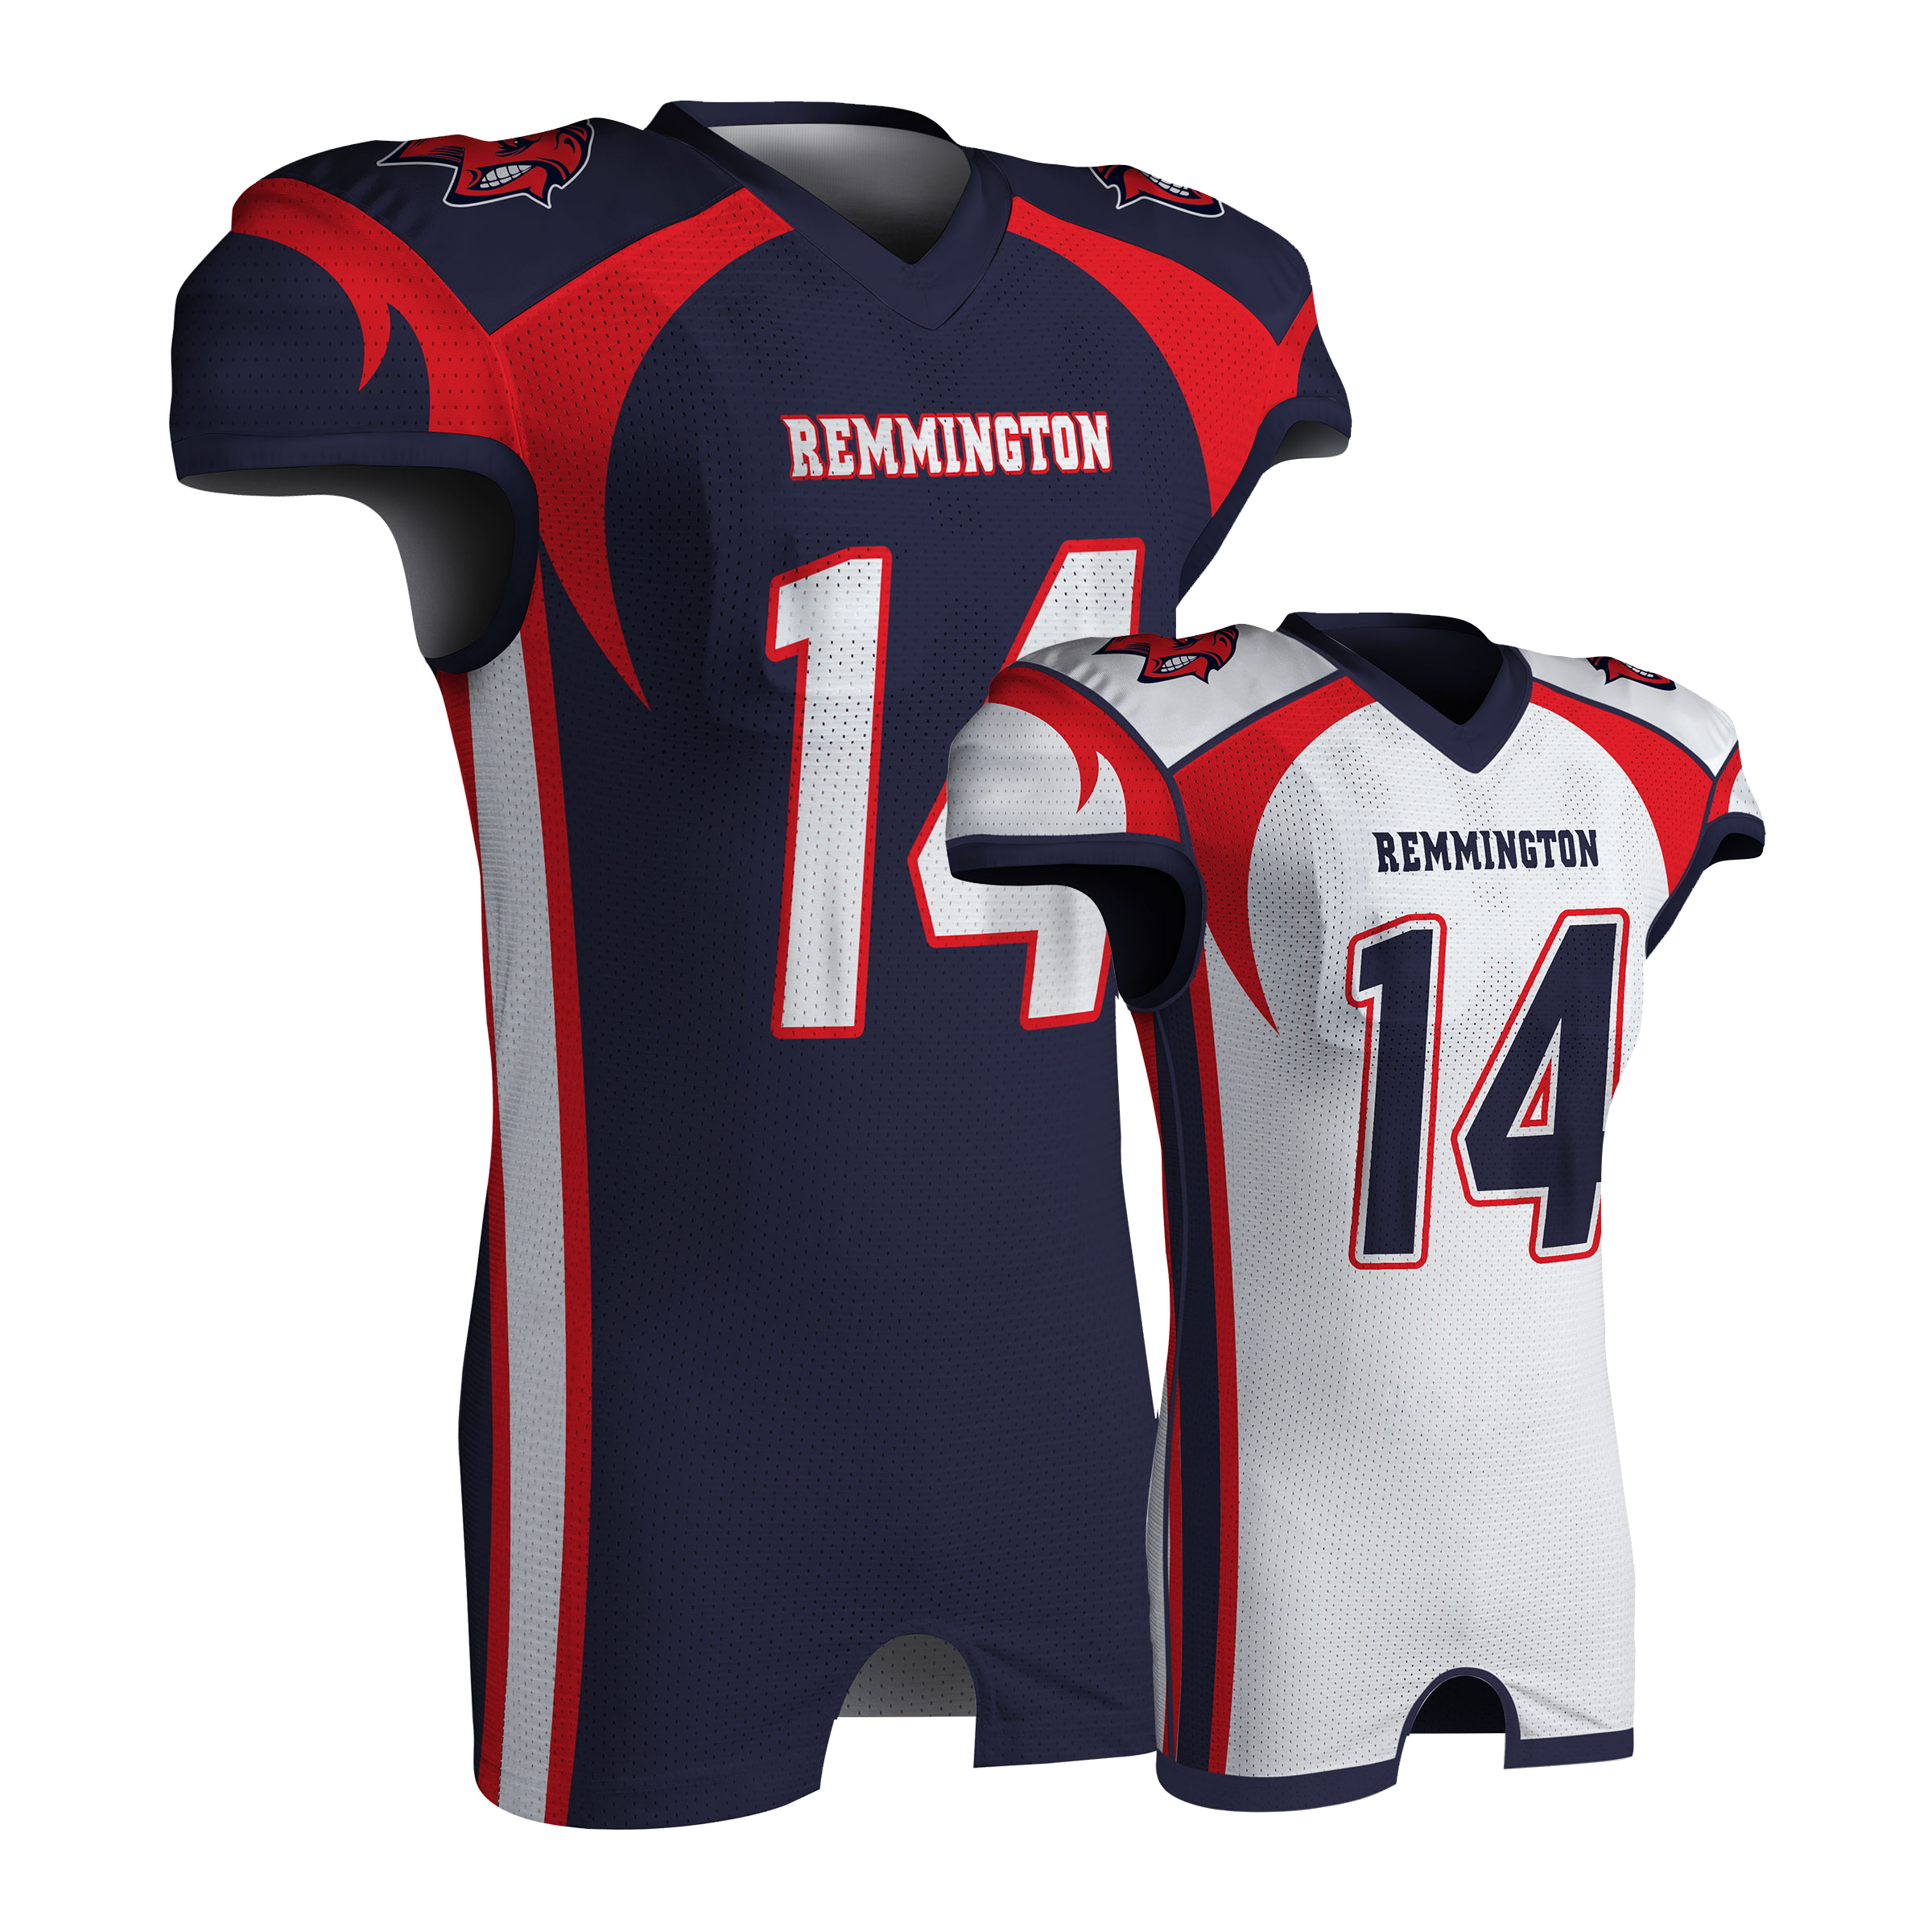 Youth FreeStyle Sublimated Lightweight Reversible Football Jersey